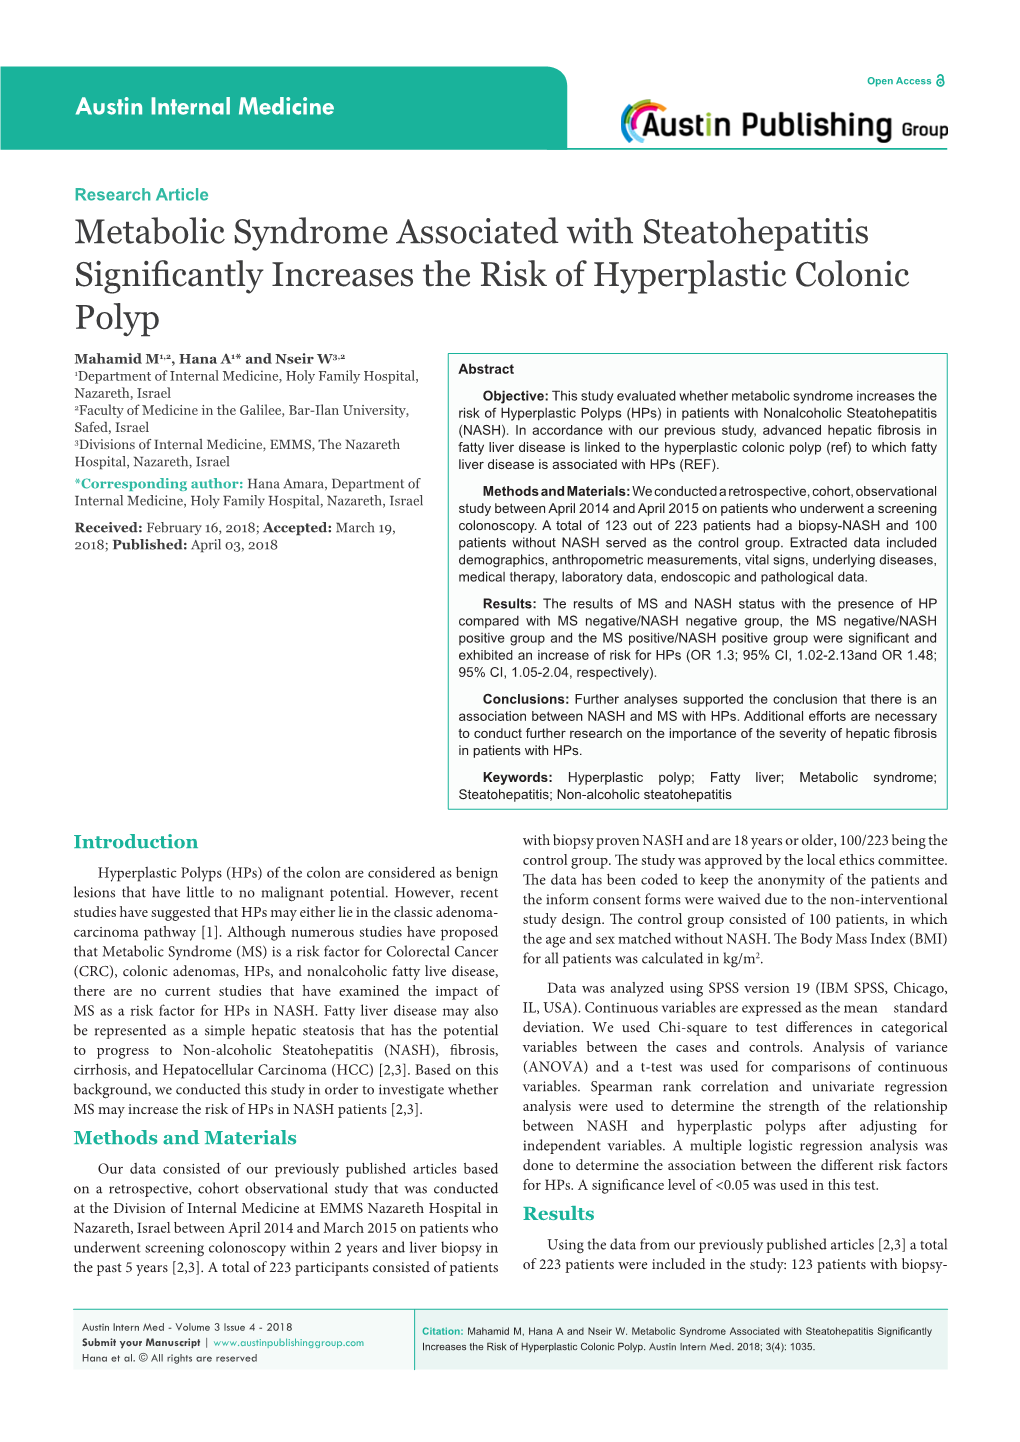 Metabolic Syndrome Associated with Steatohepatitis Significantly Increases the Risk of Hyperplastic Colonic Polyp